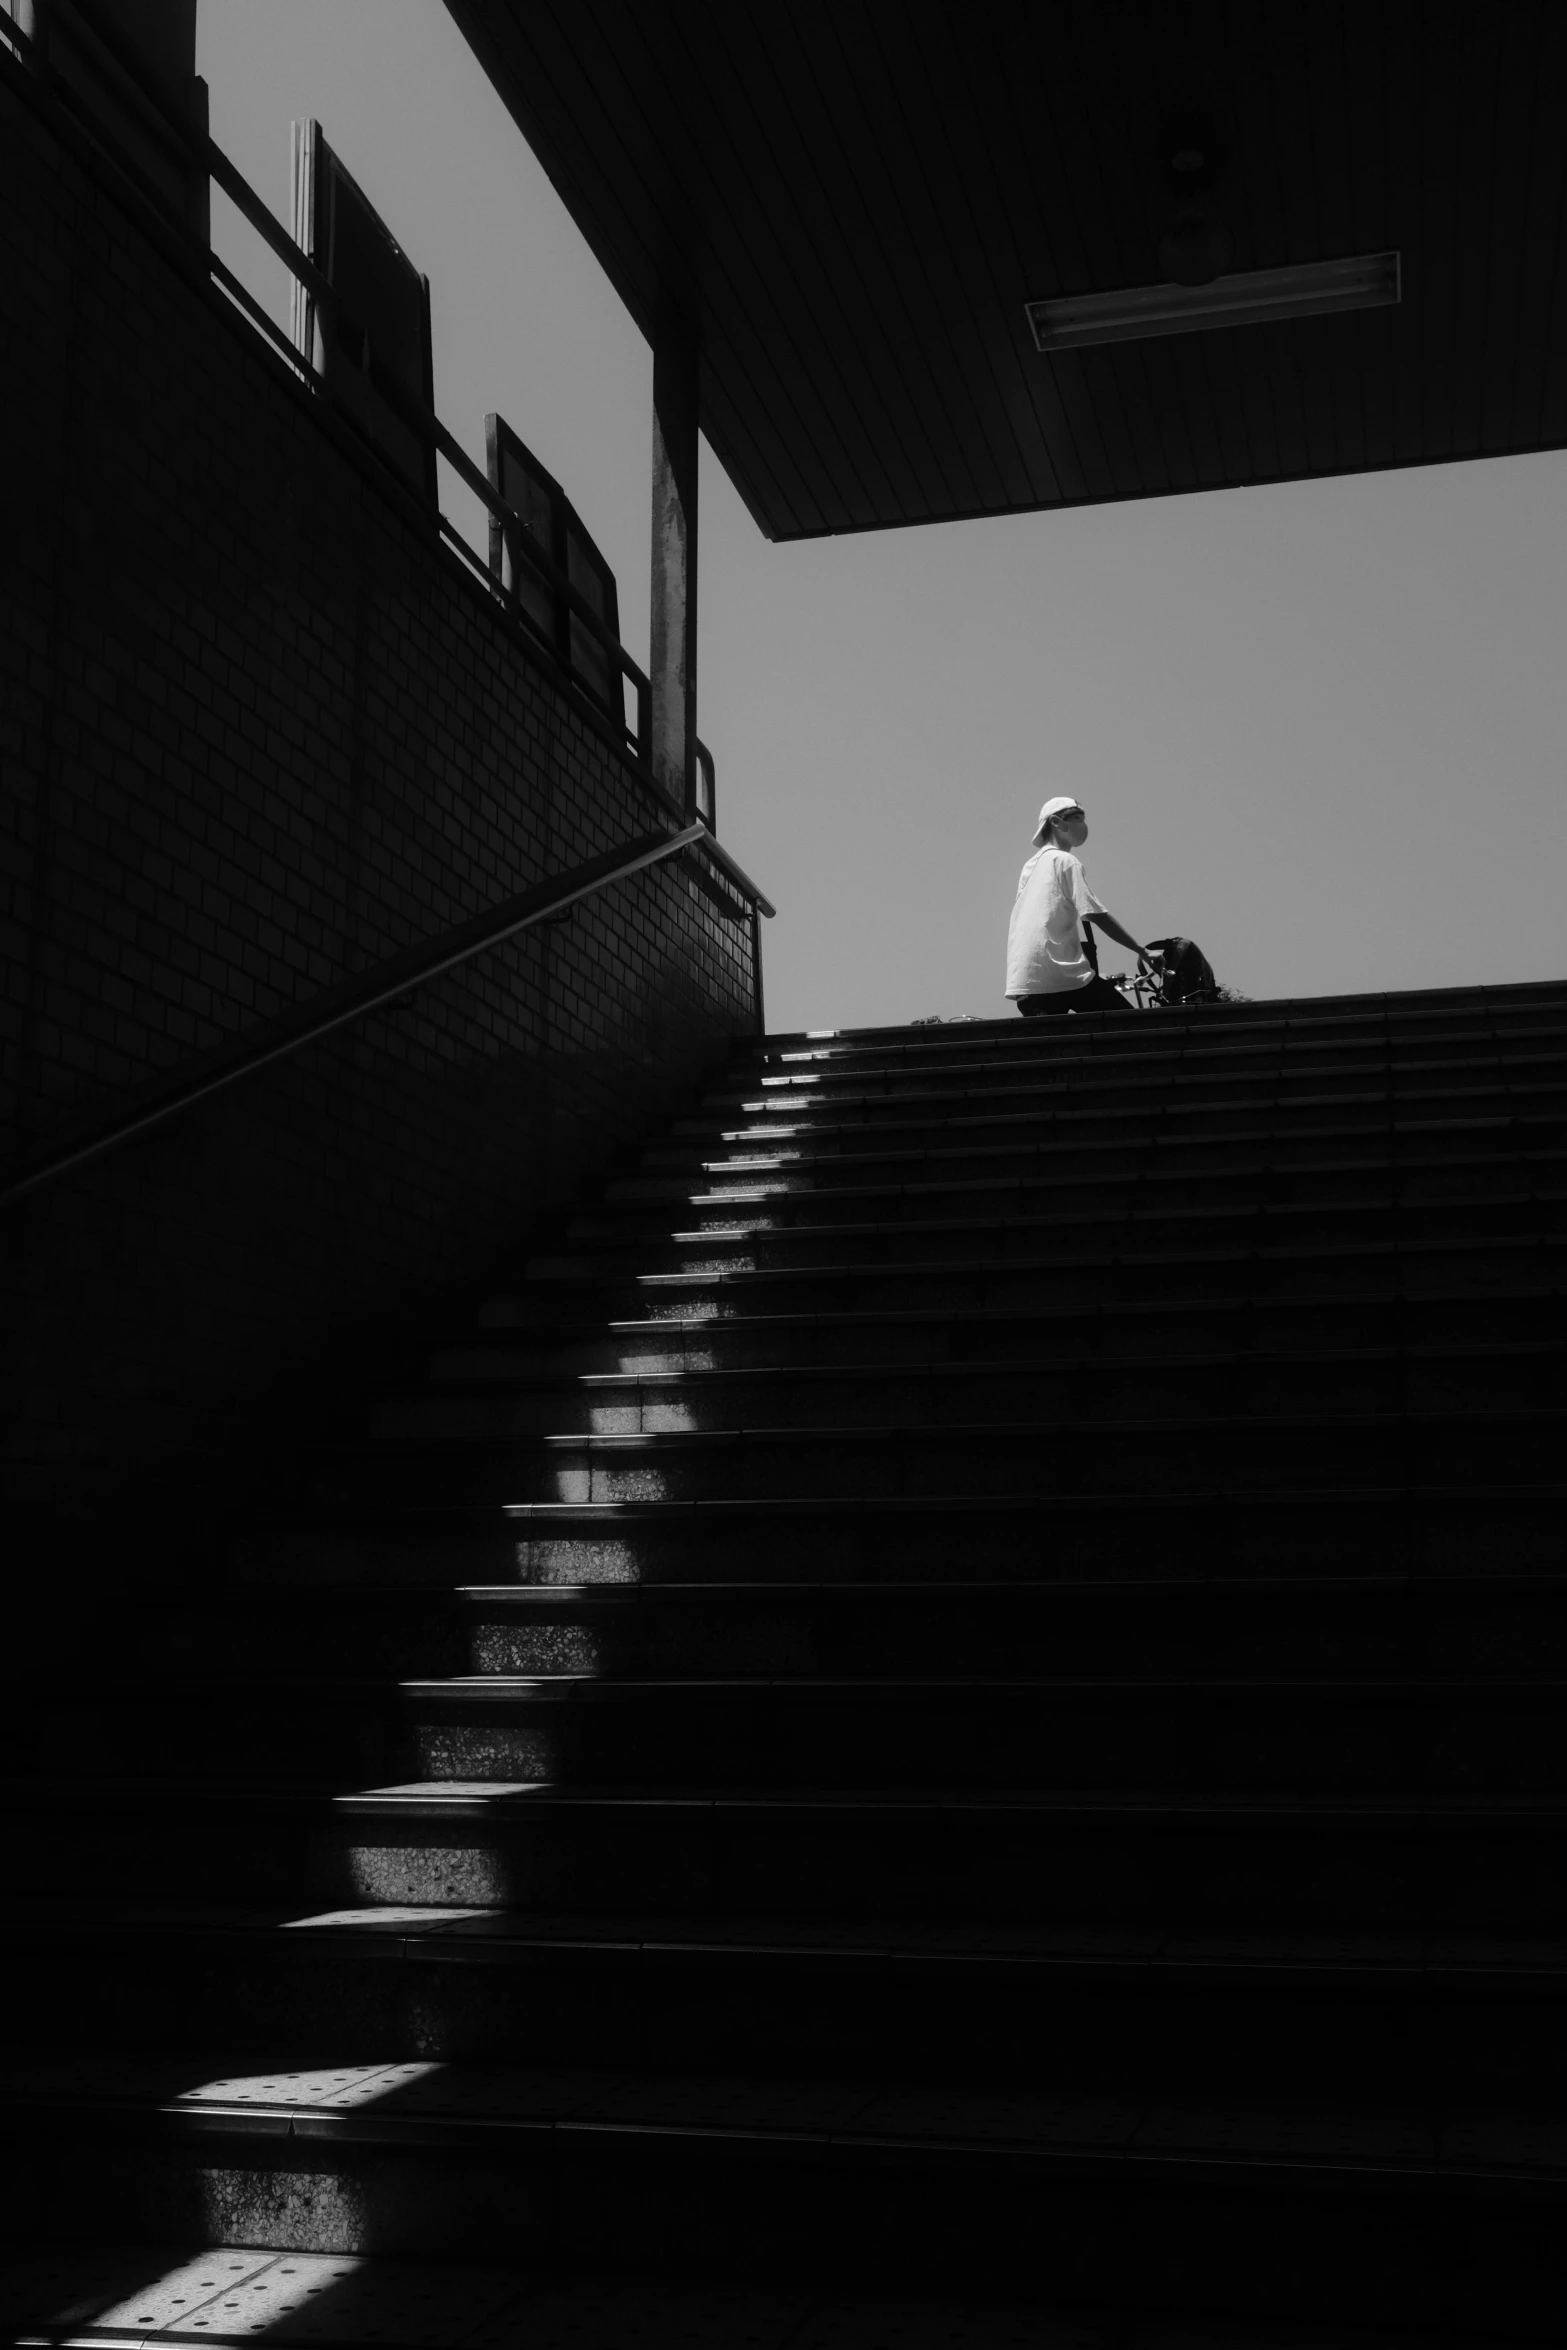 an islamic man sitting on the steps next to some stairs